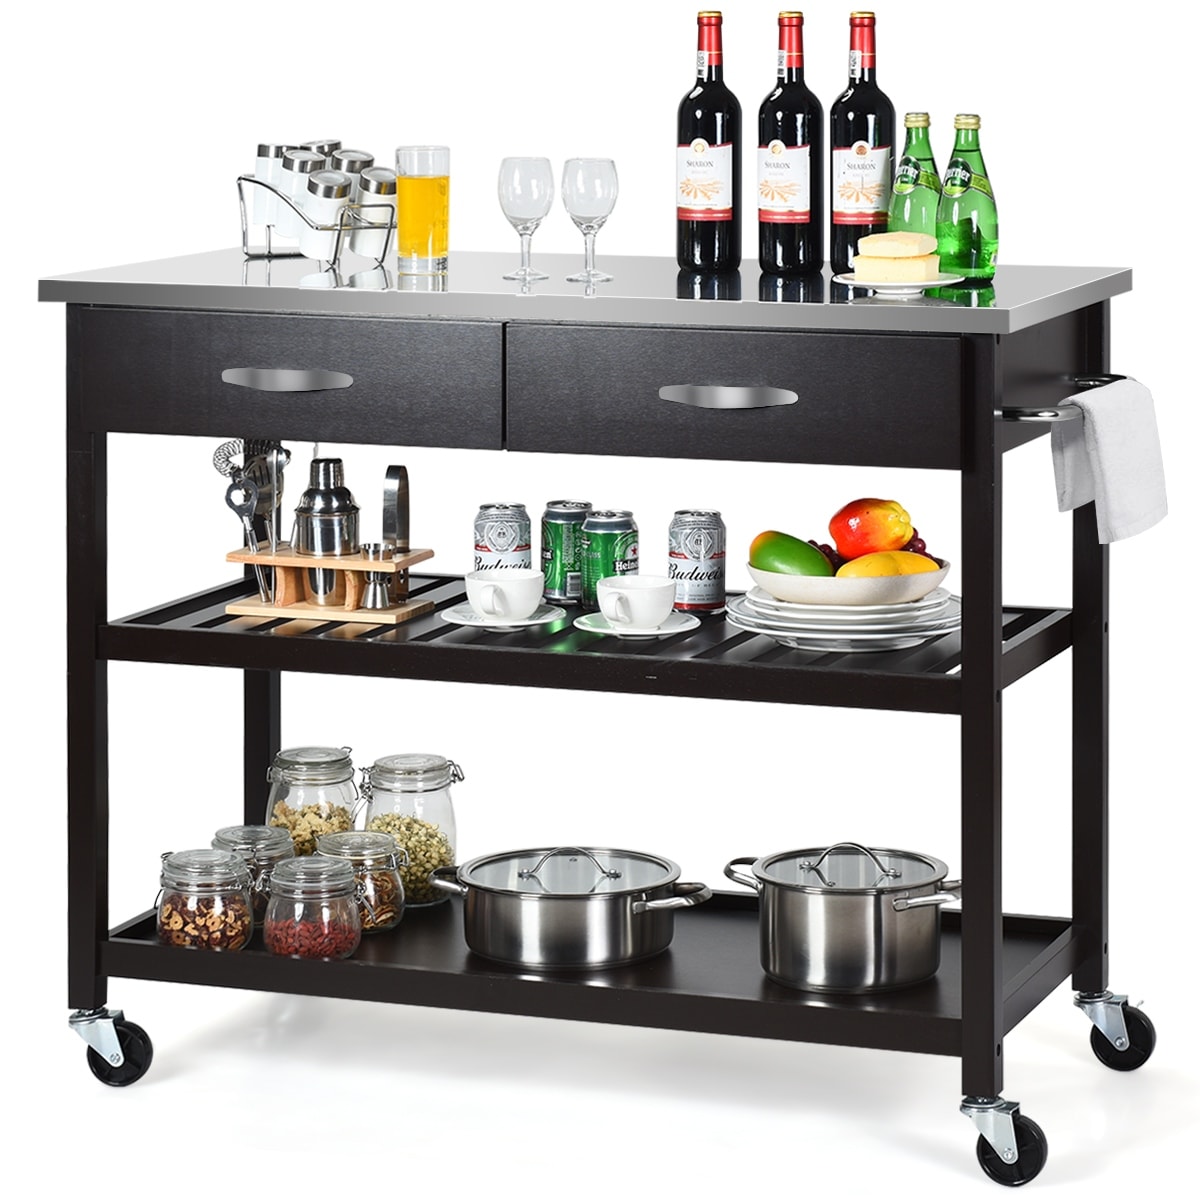 Rolling Kitchen Trolley Cart Stainless Steel Tabletop W//Storage Basket /&Drawers